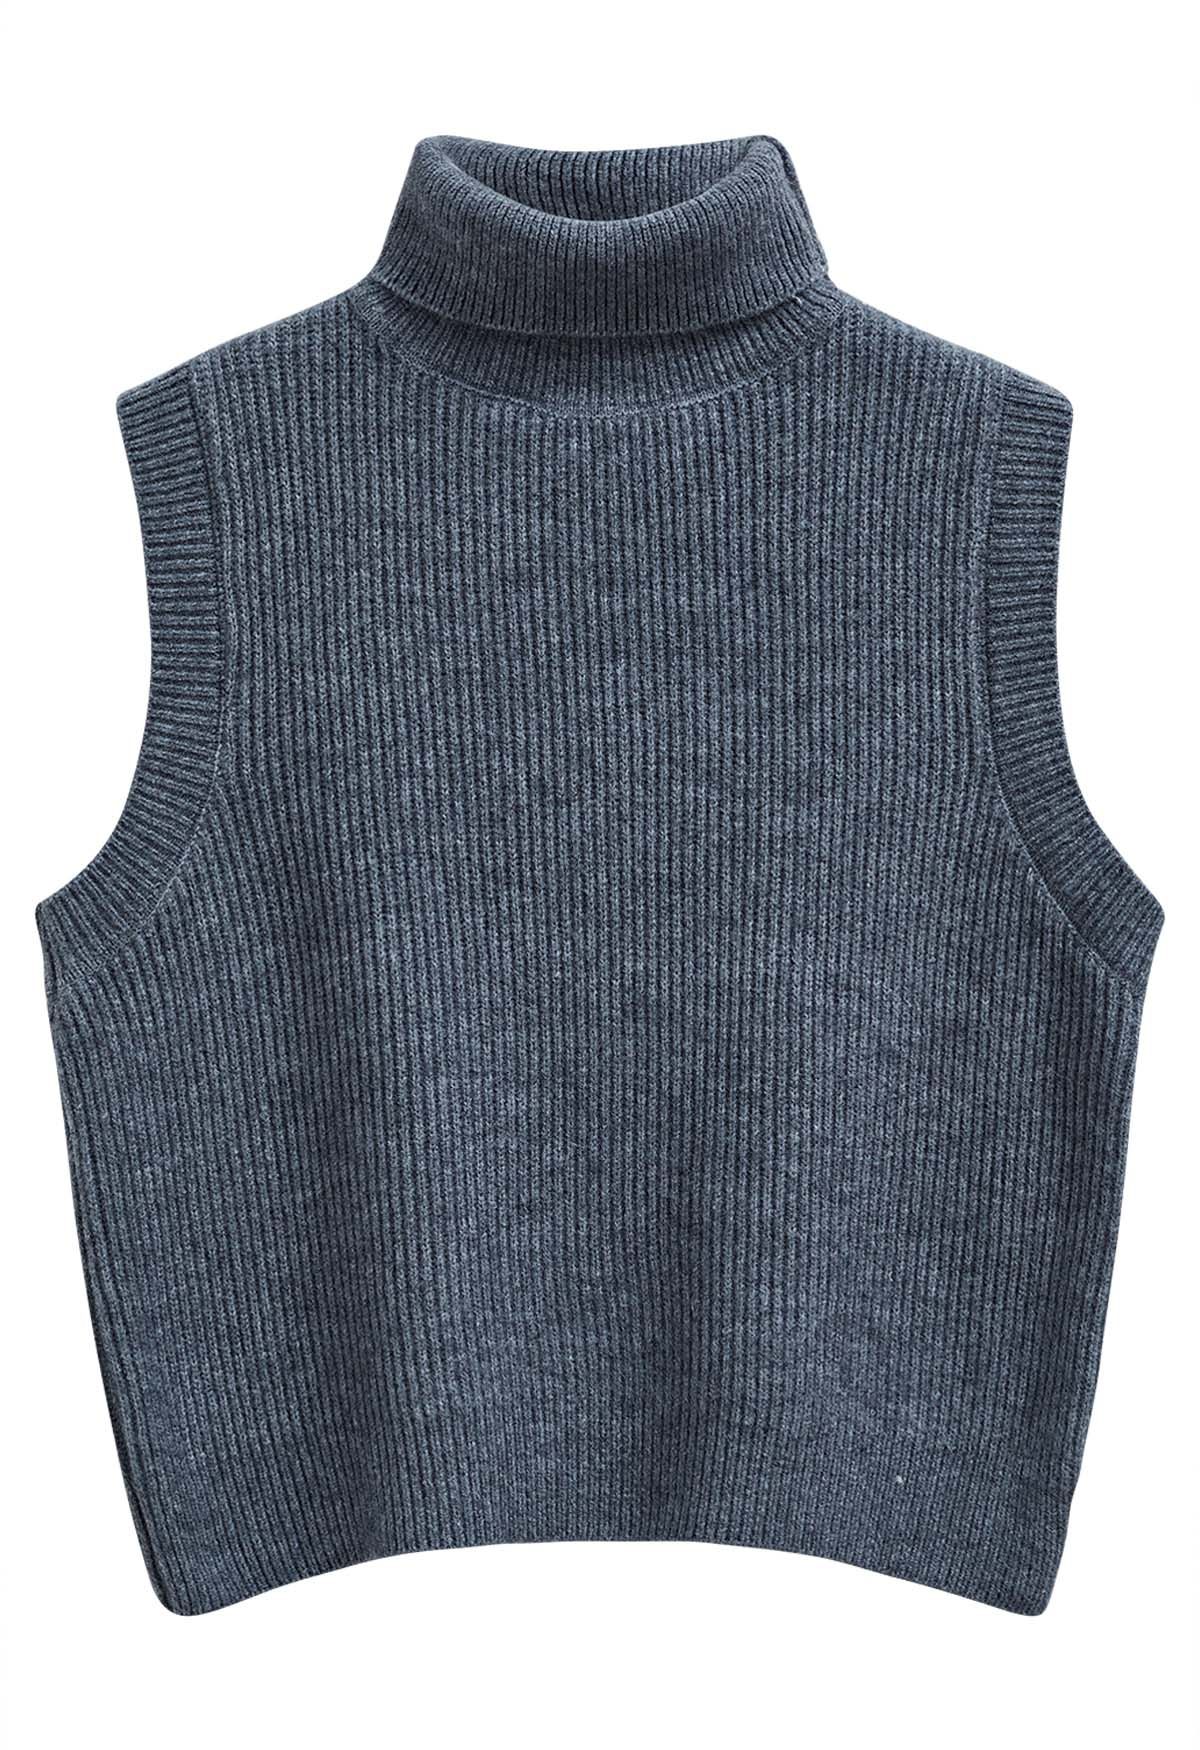 Solid Turtleneck Knit Vest in Smoke - Retro, Indie and Unique Fashion